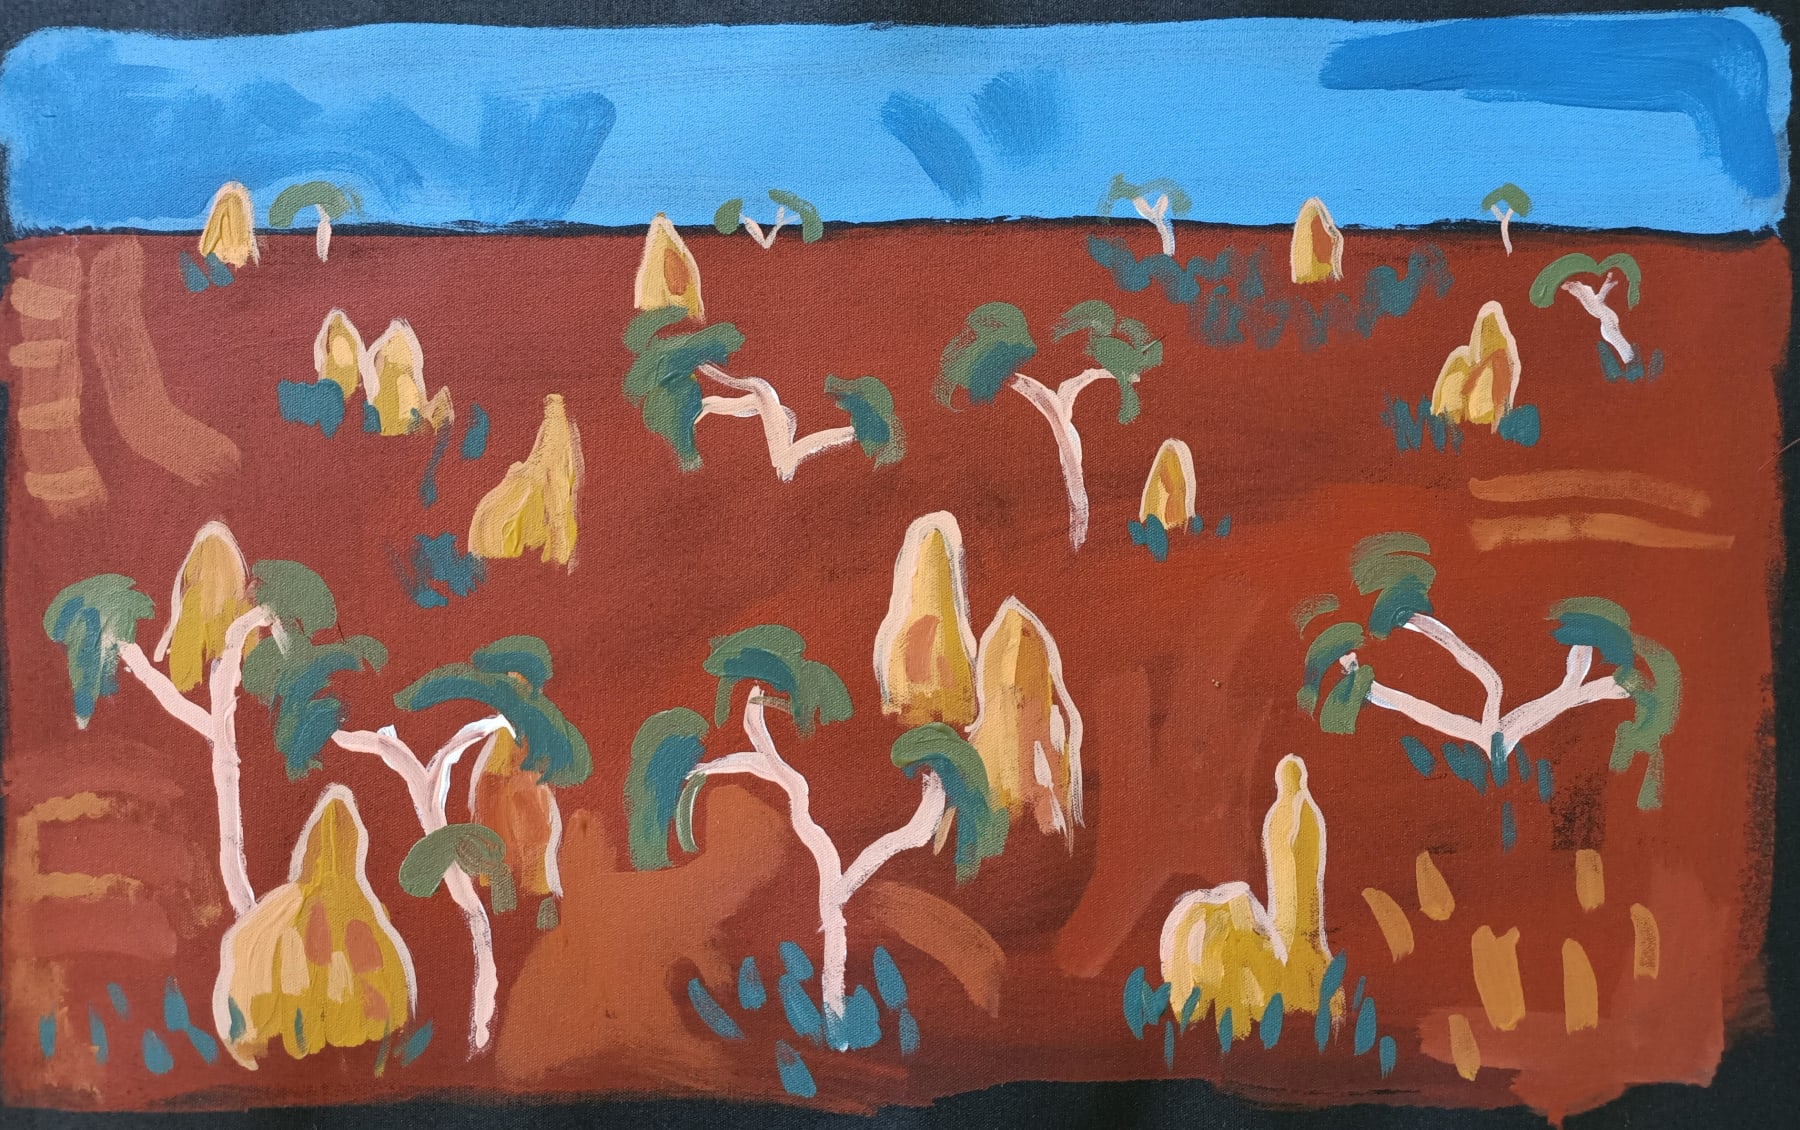 termite mounds driving north Acrylic on Canvas Original 50 x 40 cm AUD $850 GBP £430 SOLD